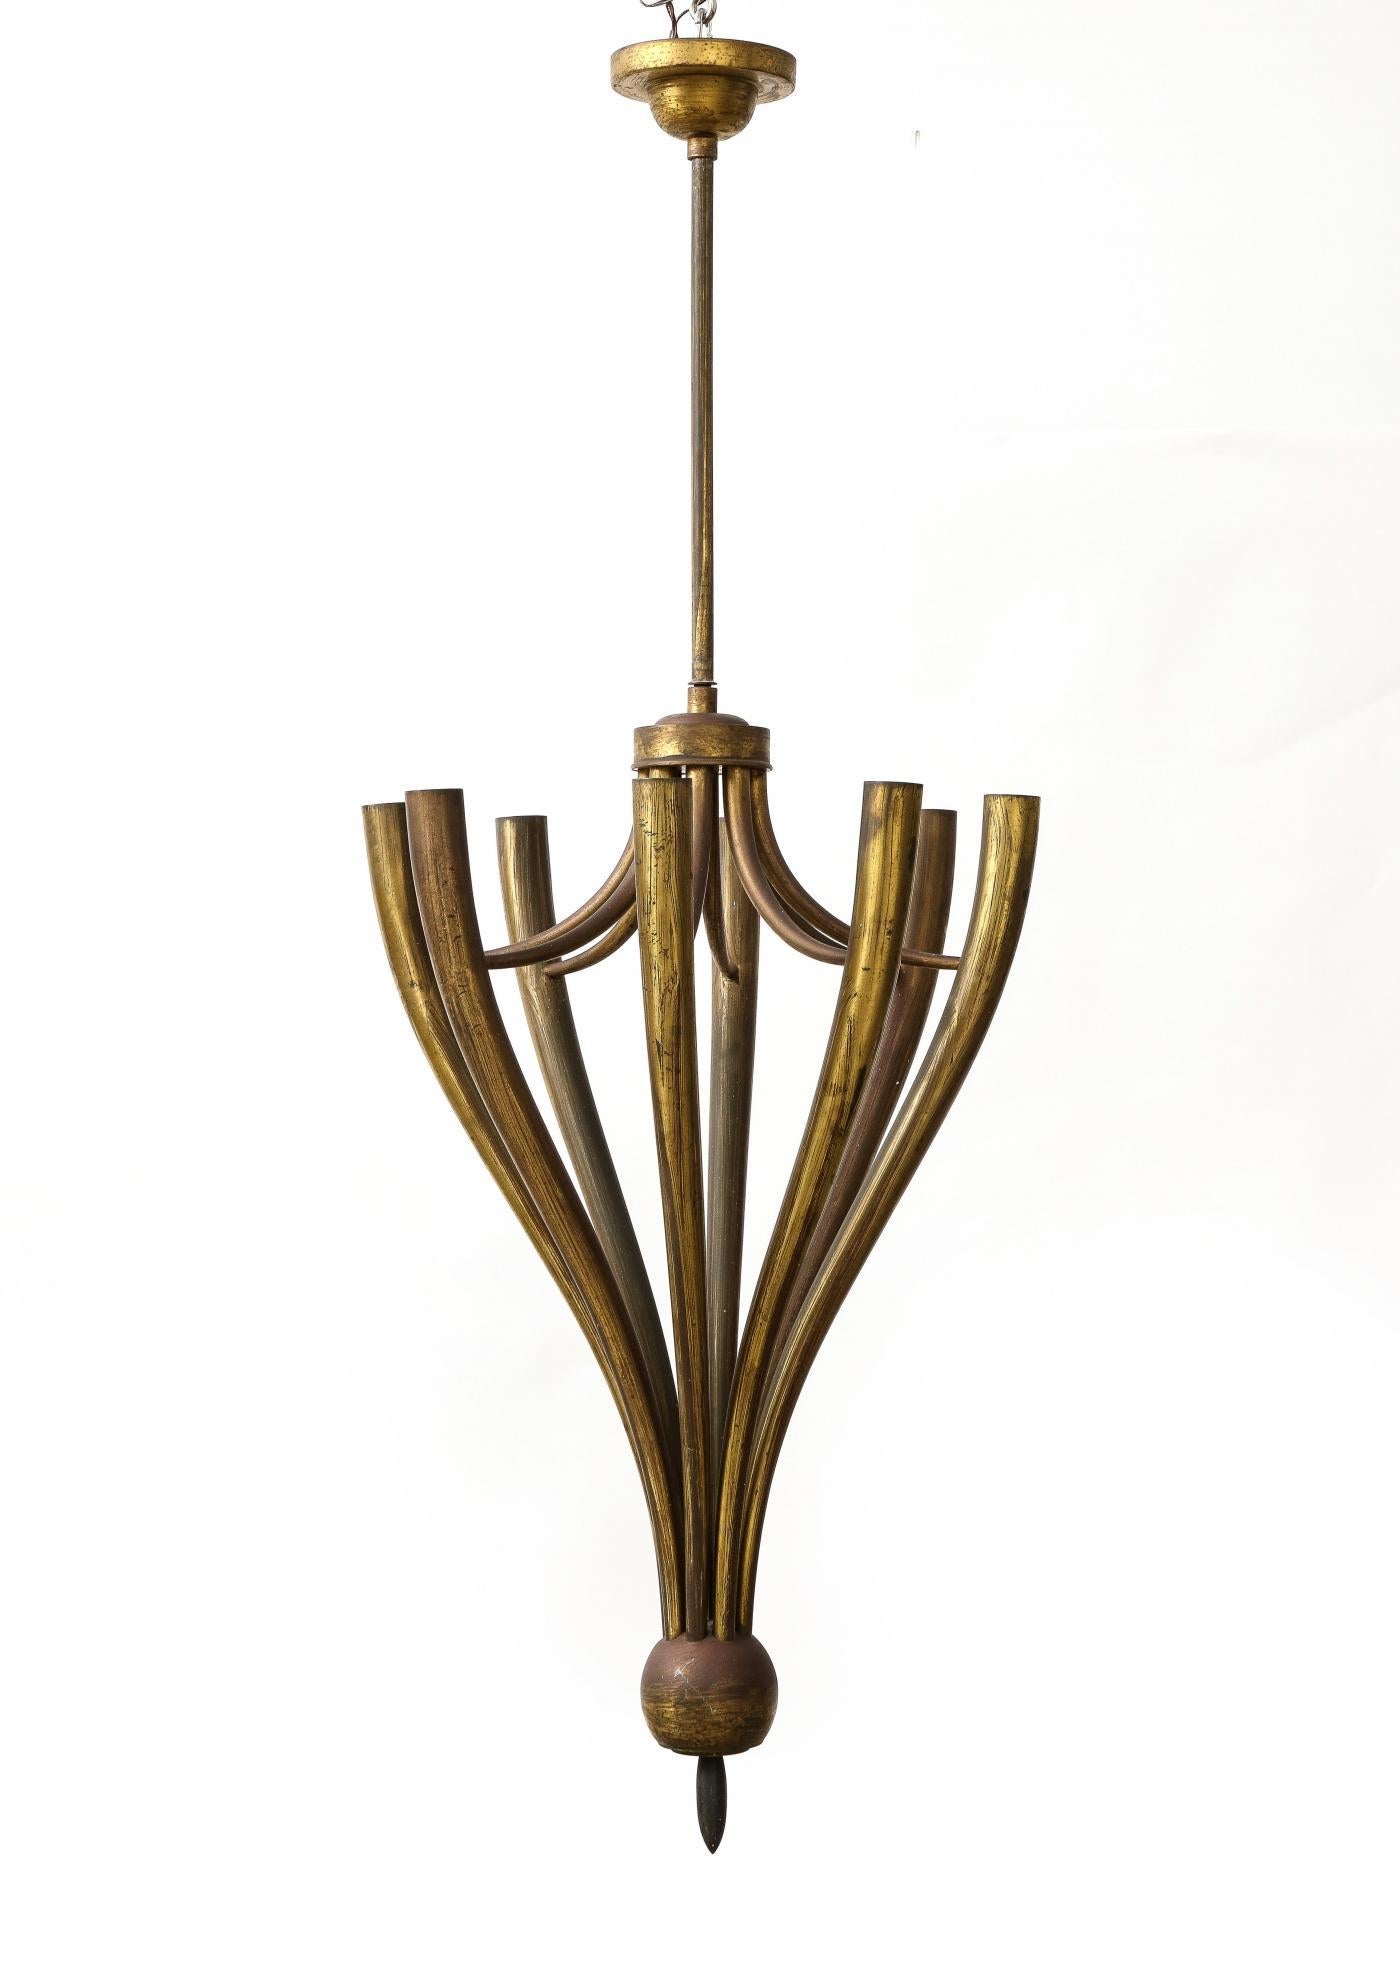 Modern Eight-Arm Patinated Brass Chandelier by Guglielmo Ulrich, Italy, c. 1950 For Sale